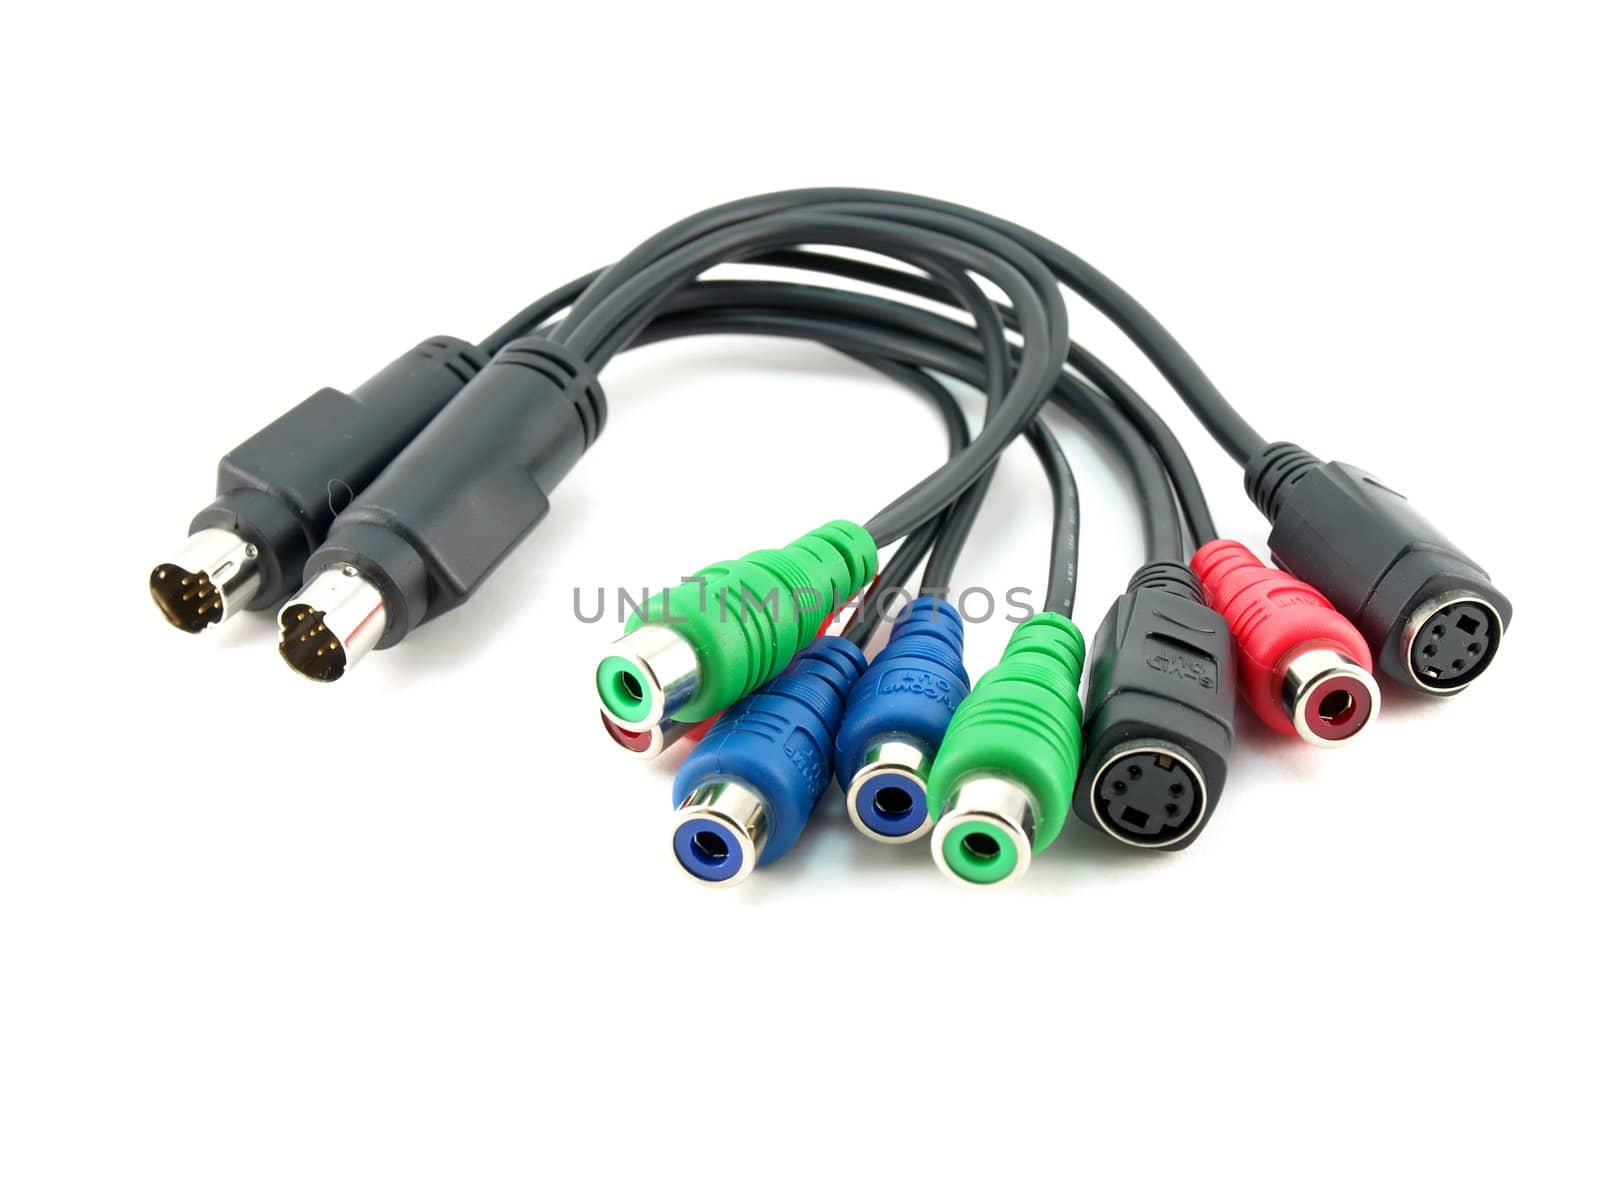 Cables with color connectors over white